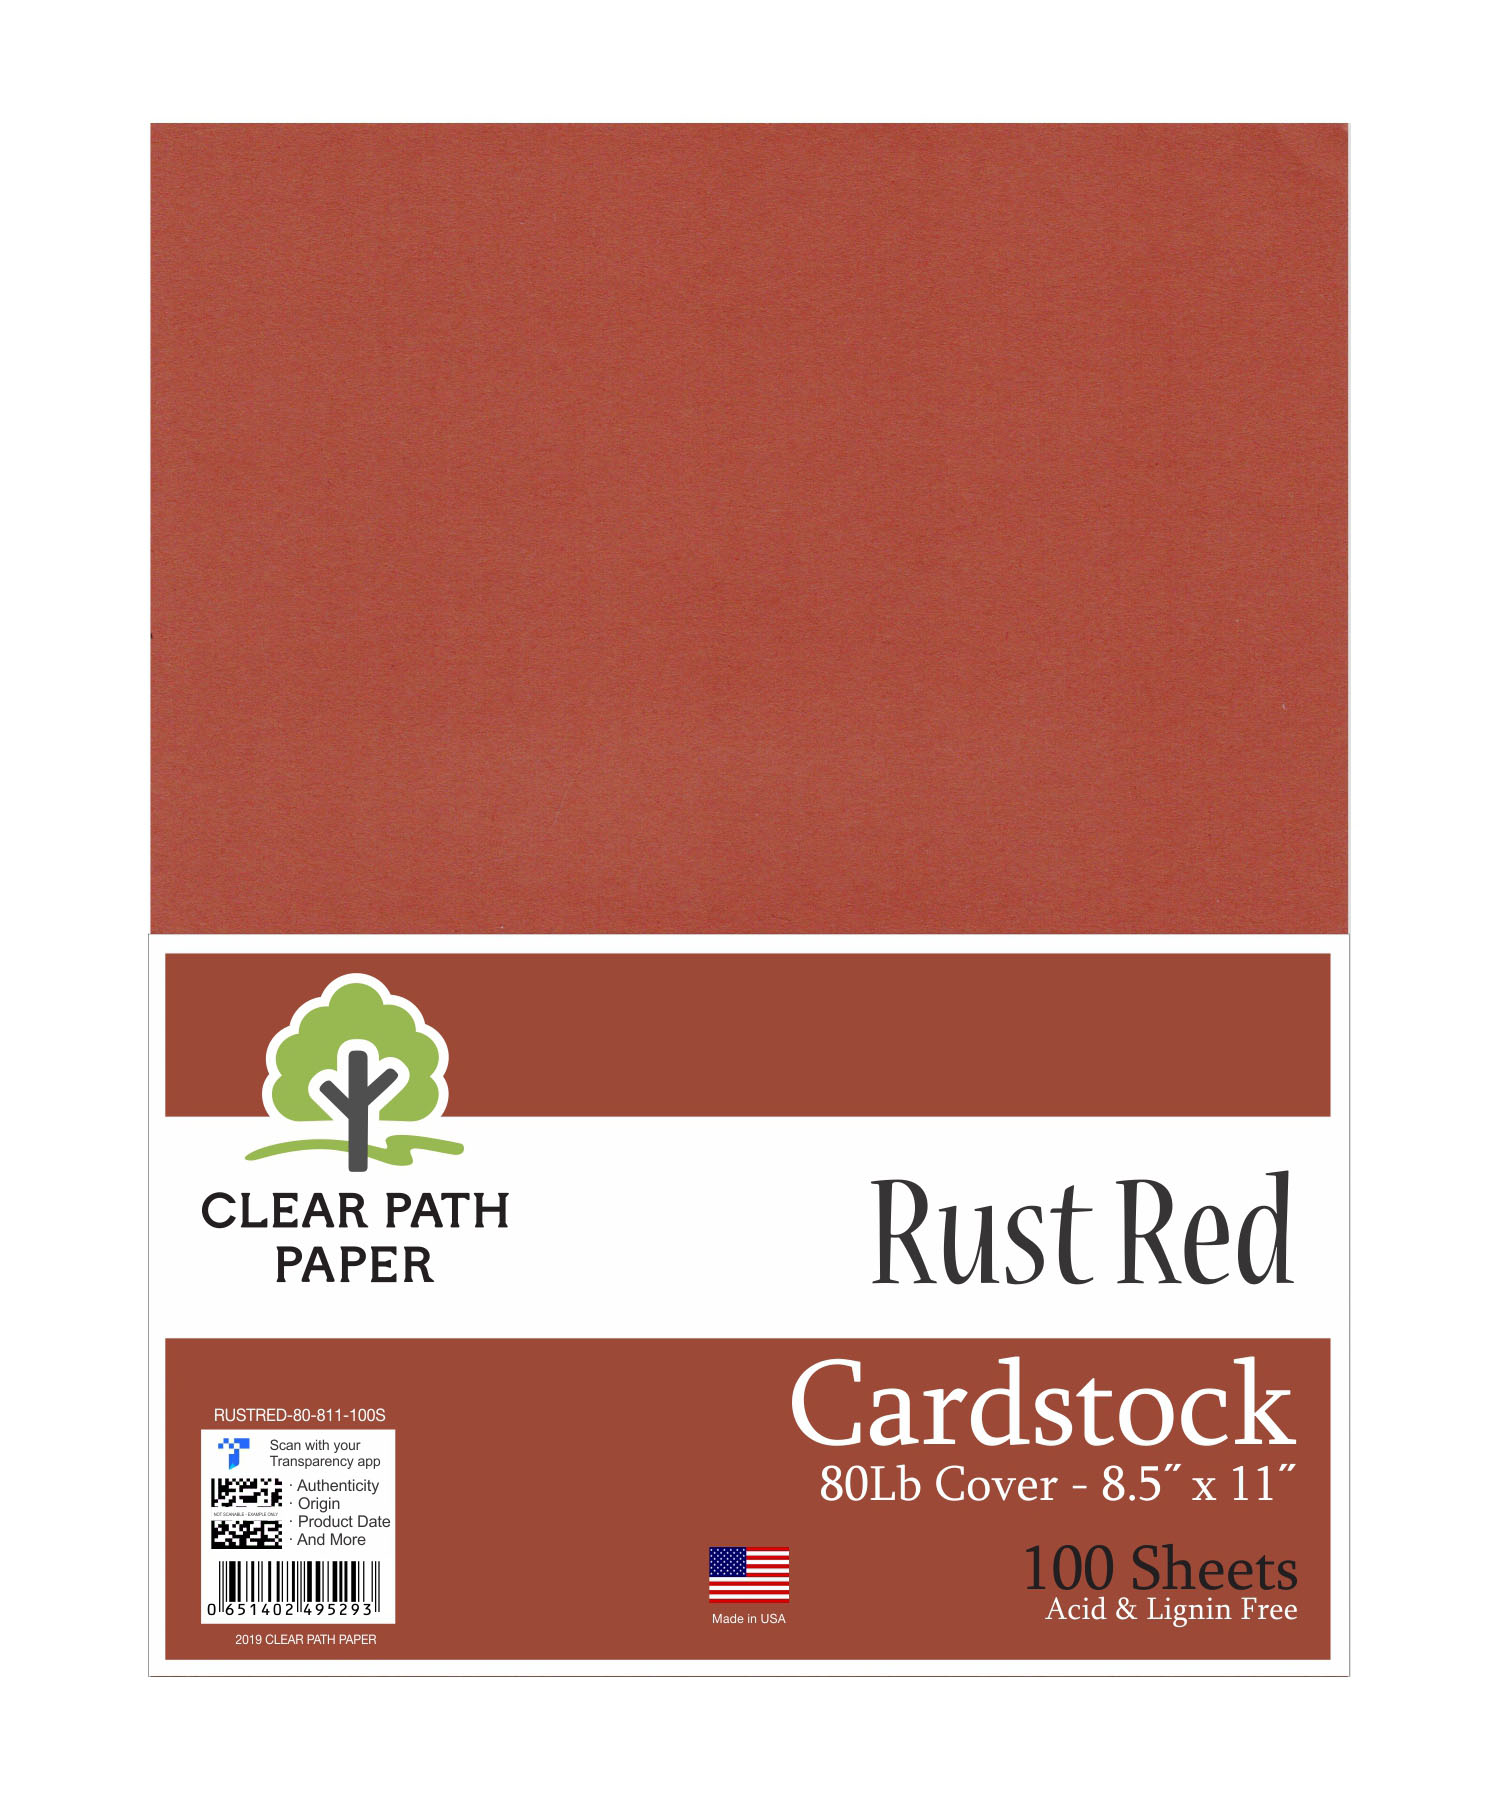 Rust Red Cardstock - 8.5 x 11 inch - 80Lb Cover - 100 Sheets